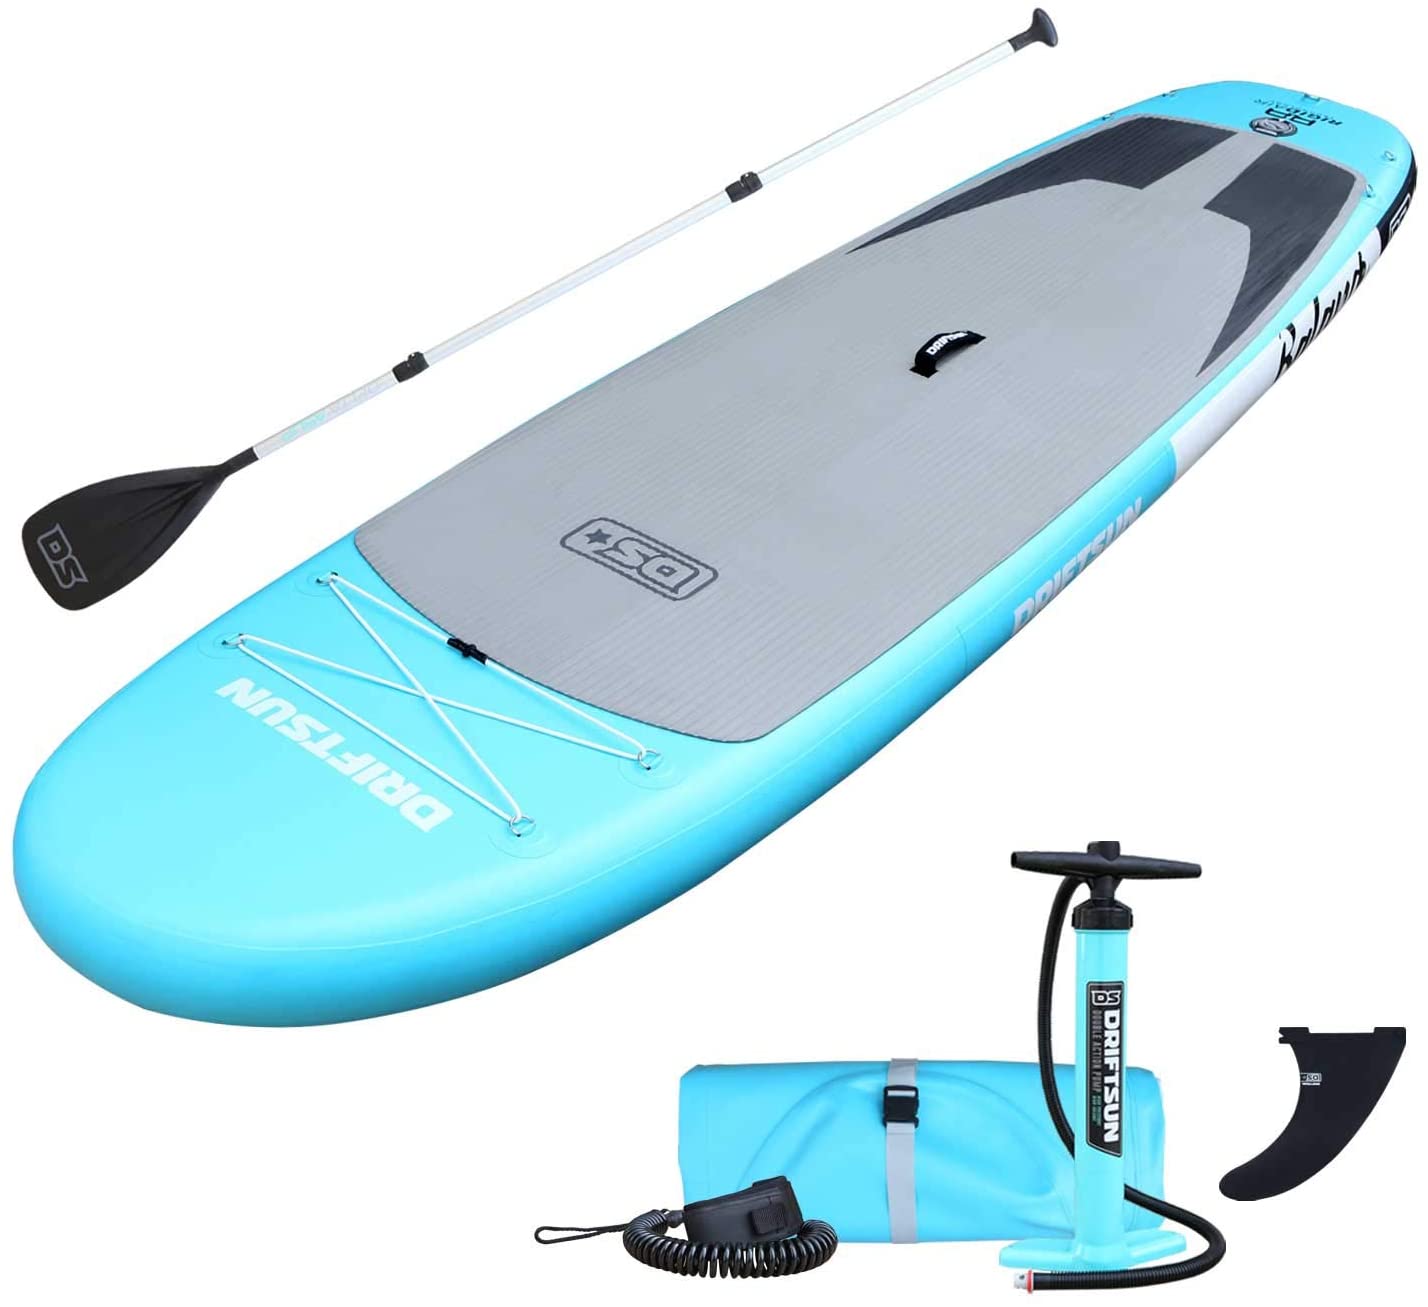 Driftsun 11 Foot Extra Wide Stable Inflatable Paddle Board, Yoga Balance Stand Up SUP